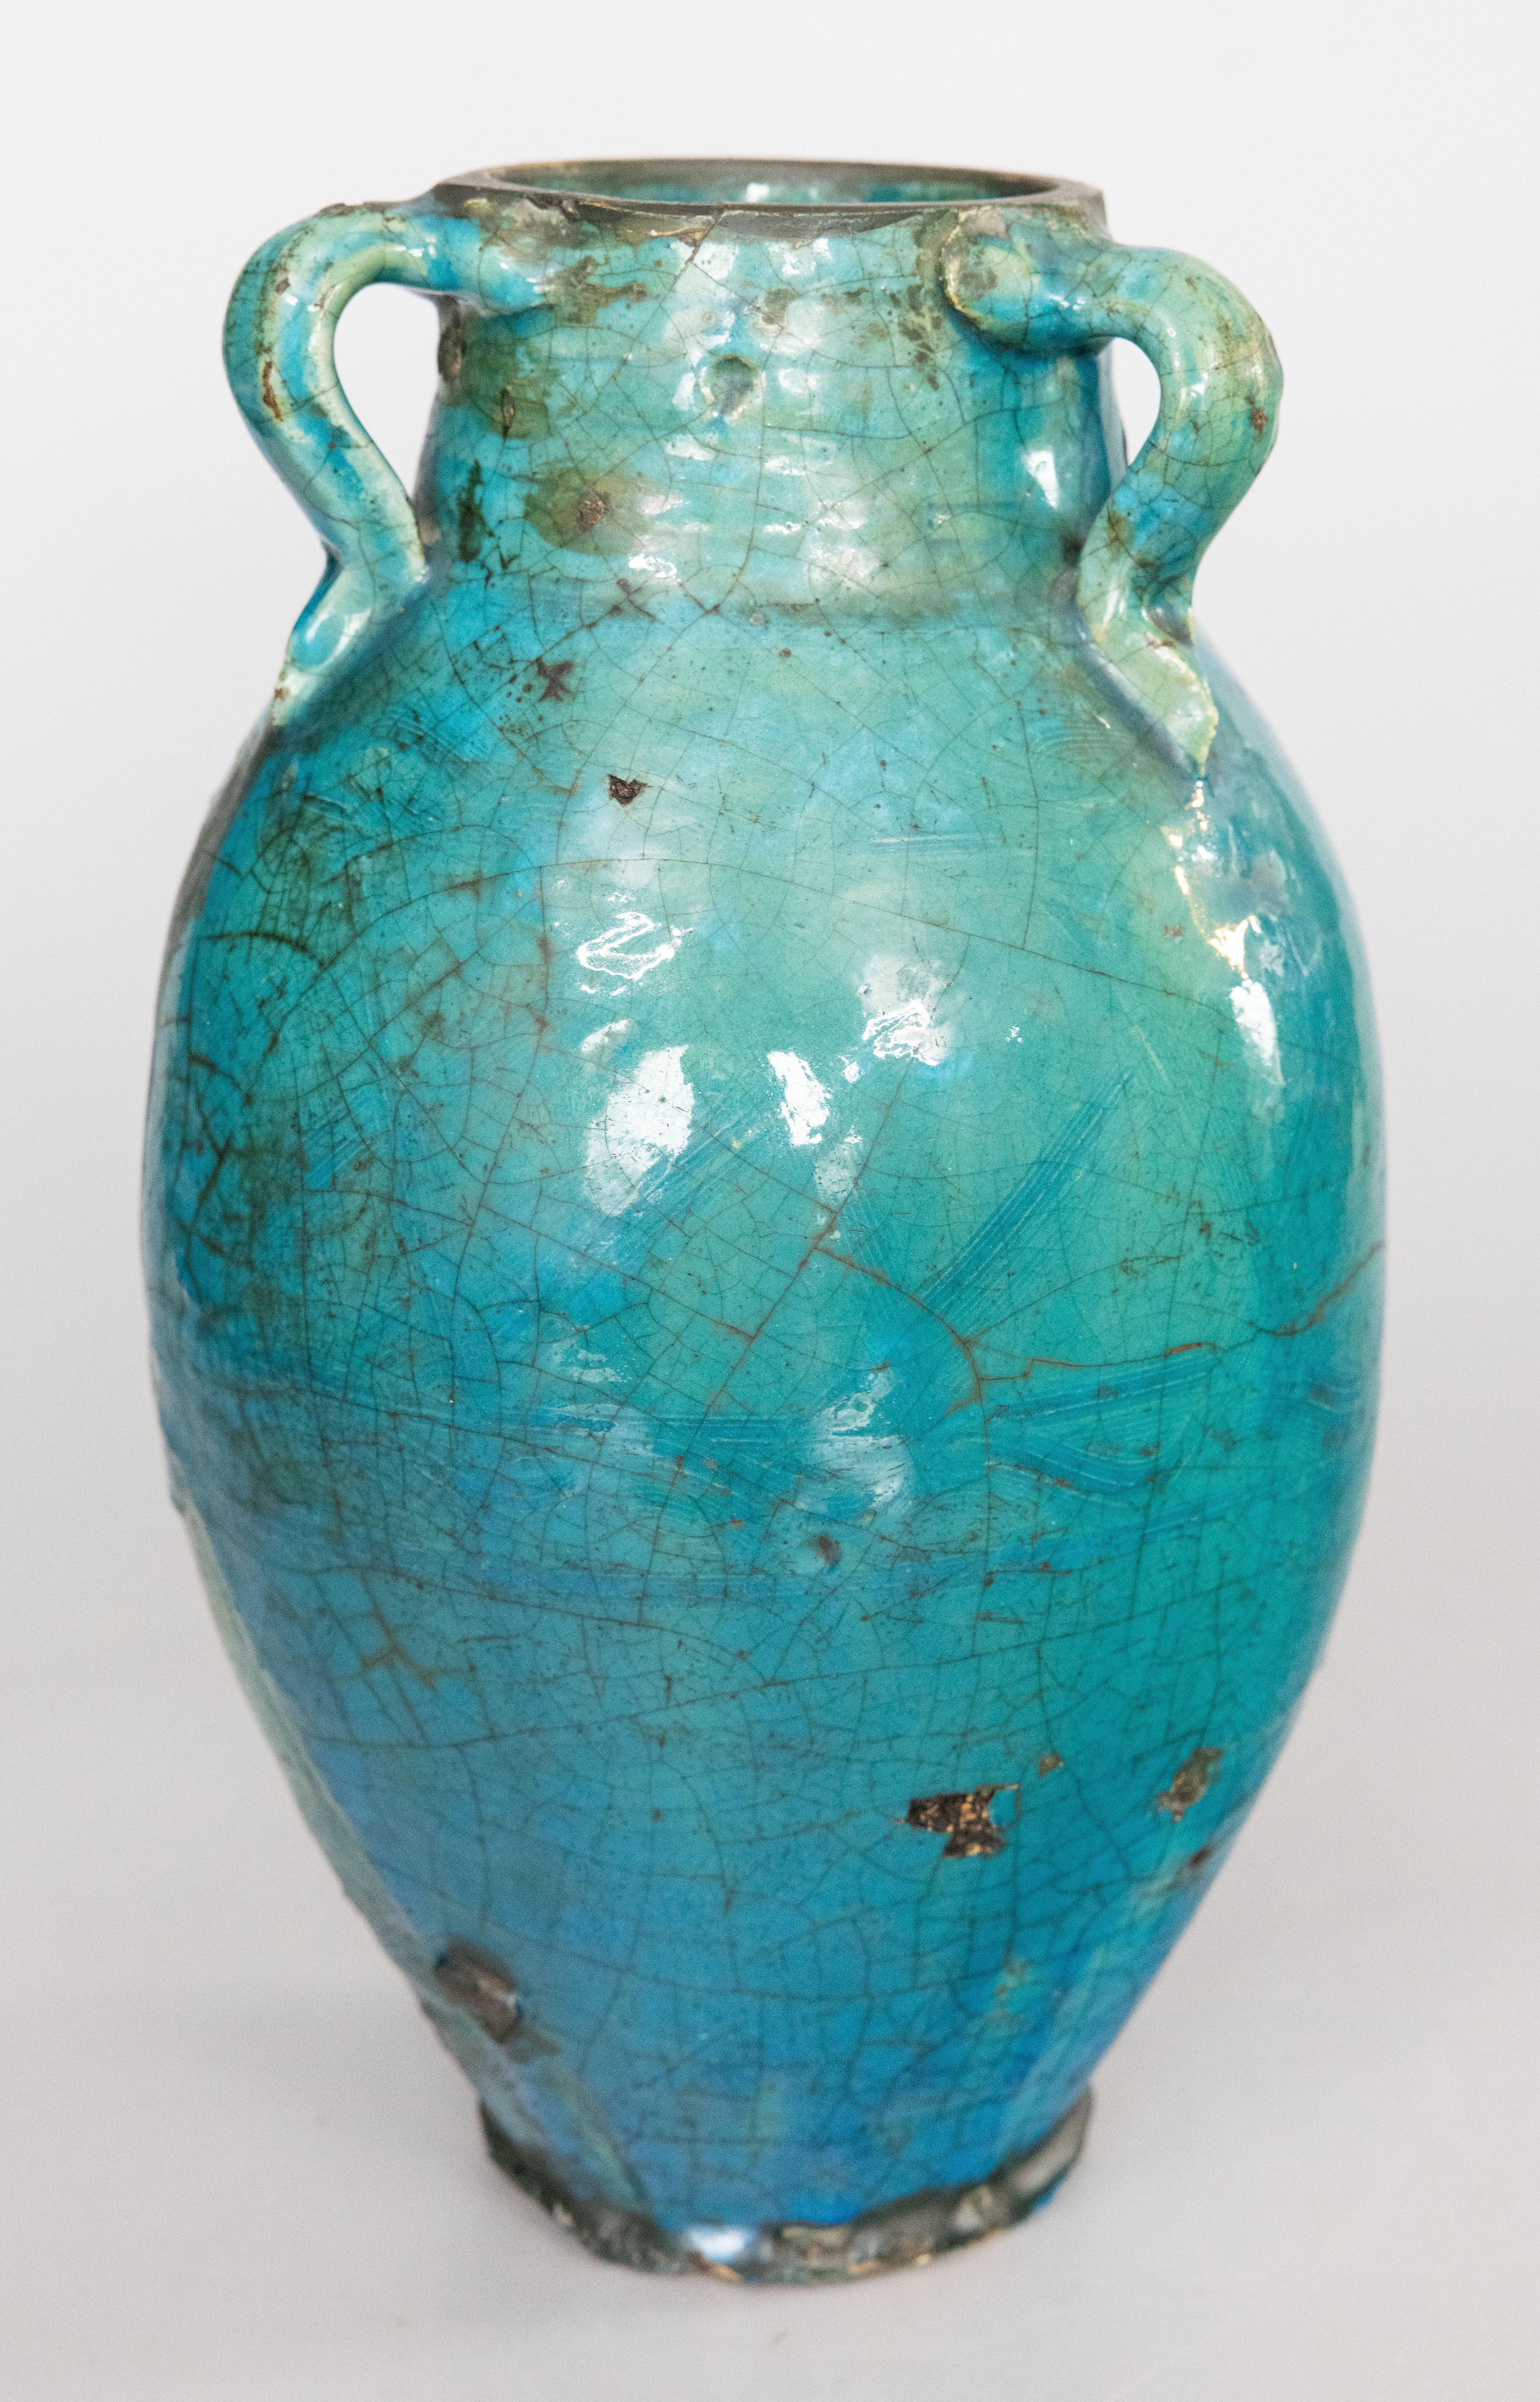 French Provincial Large 19th Century French Turquoise Glazed Terracotta Vase Urn Olive Jar For Sale